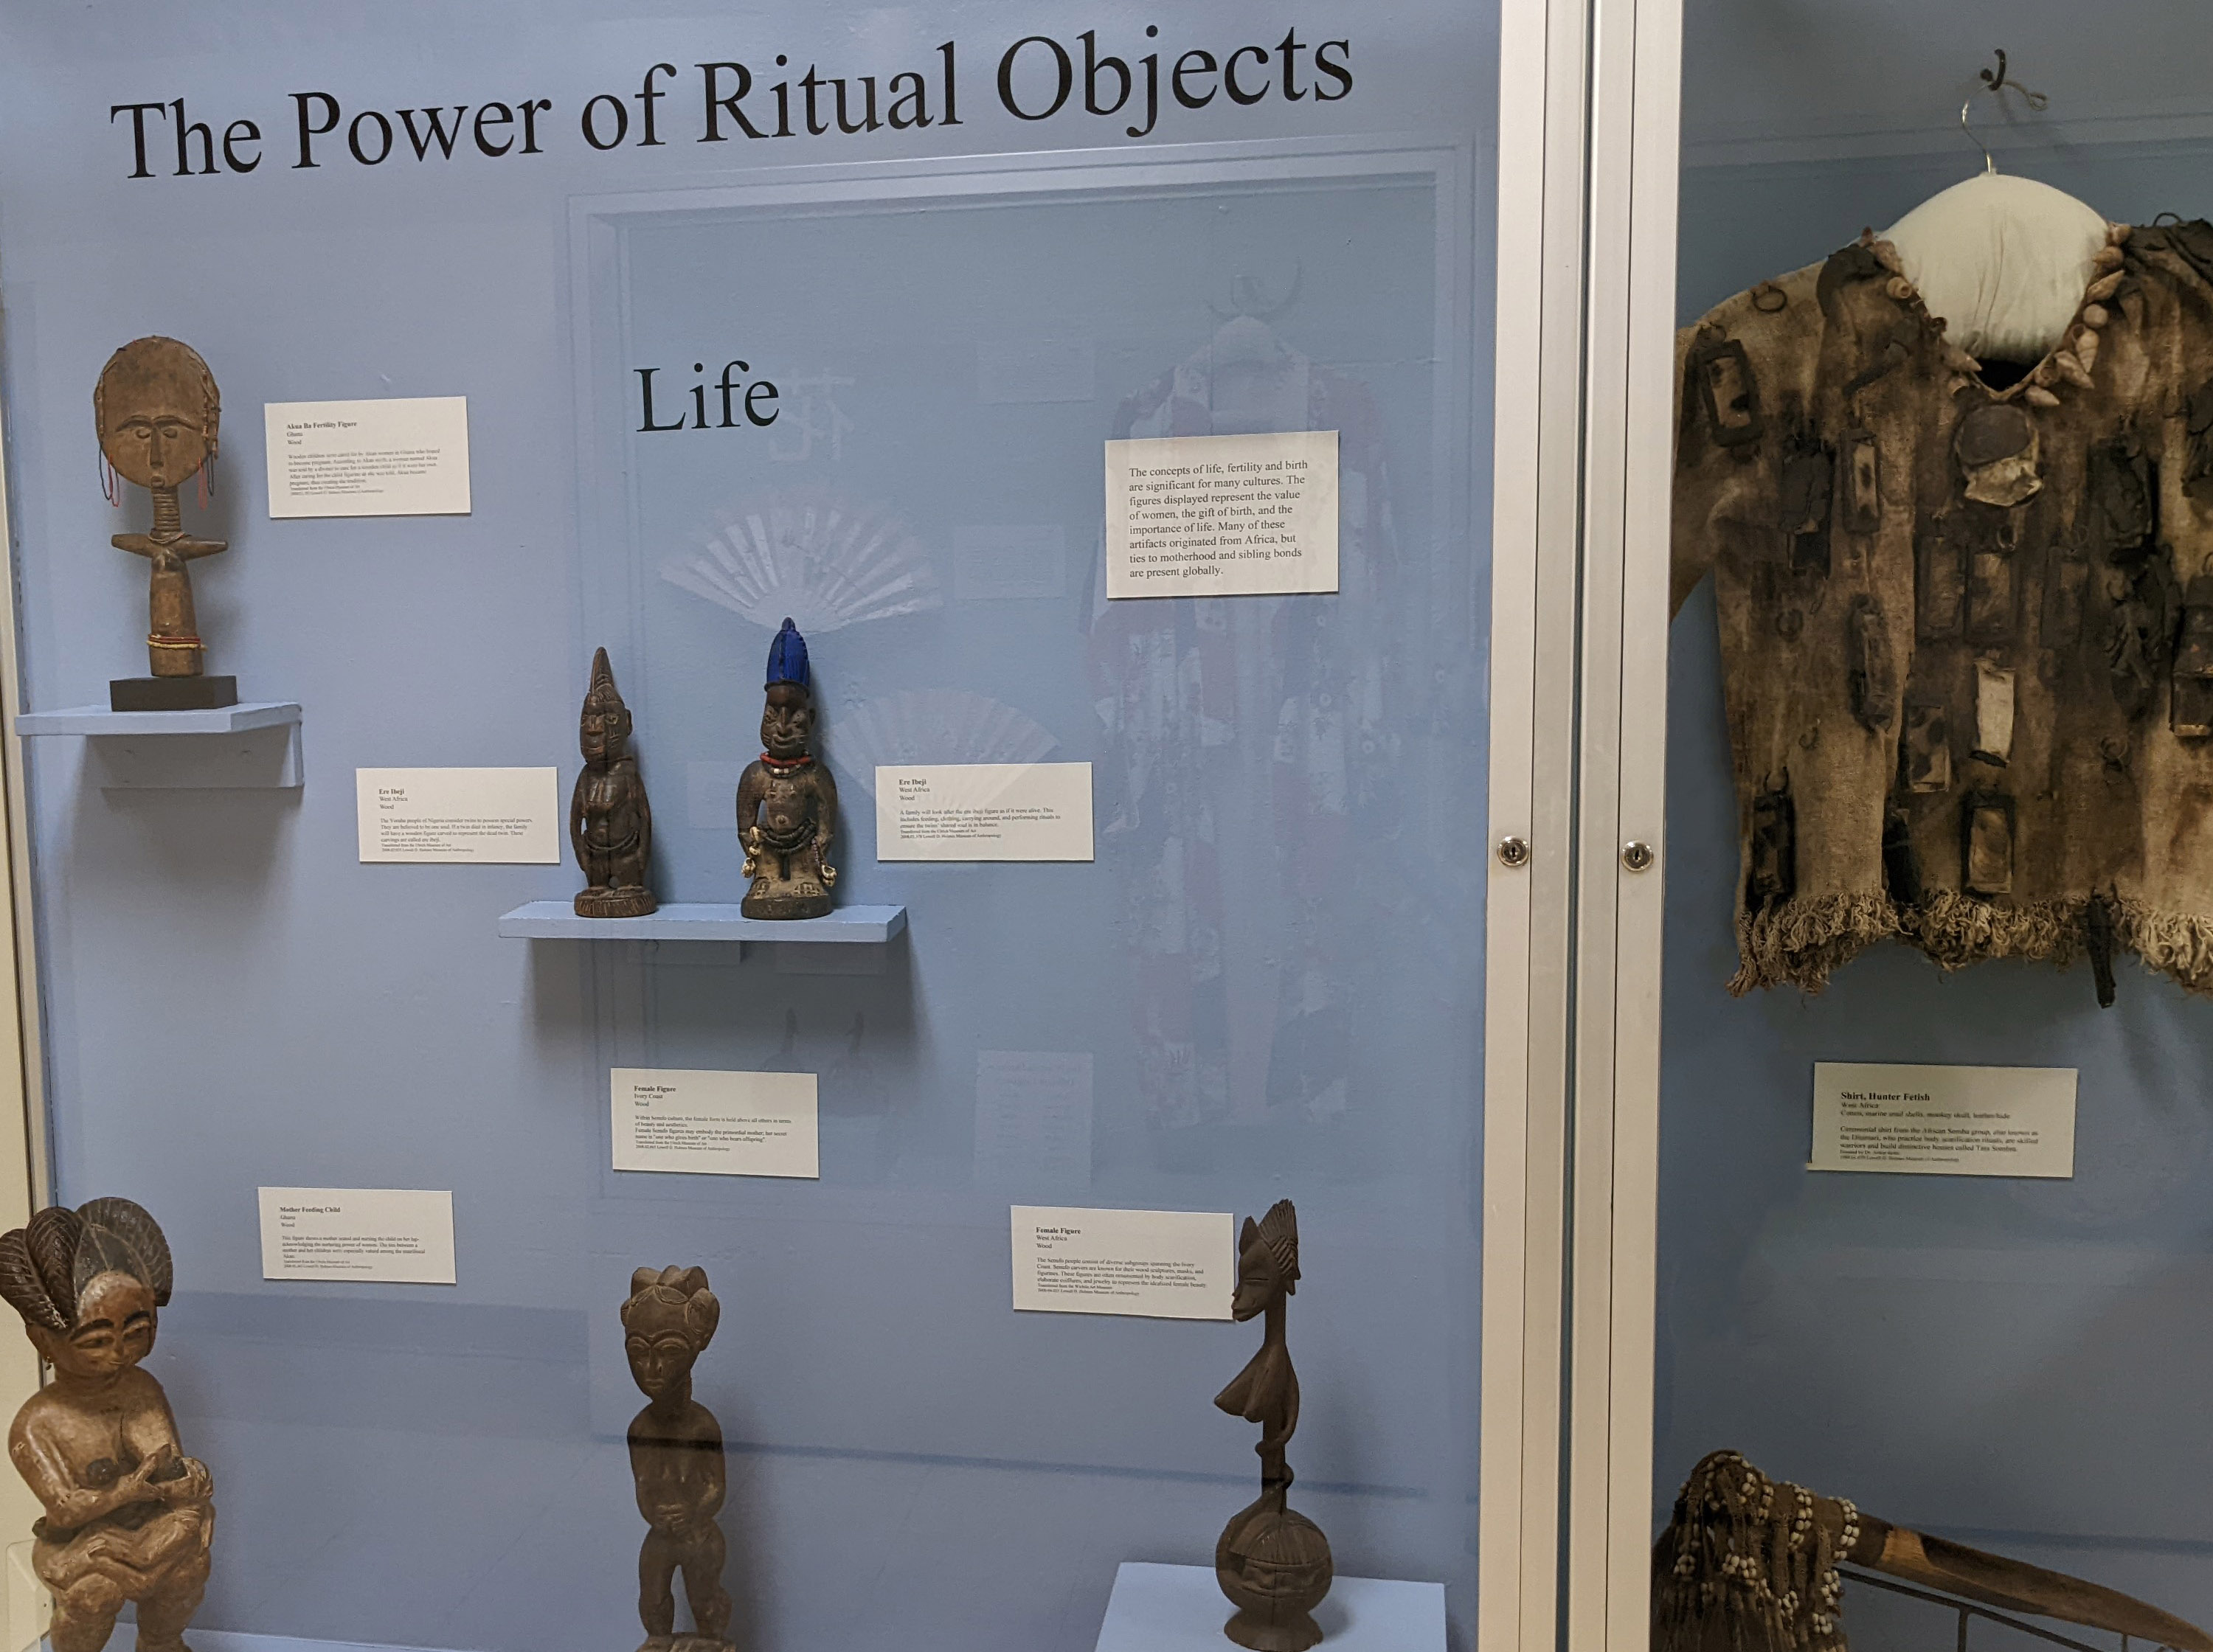 Exhibit with a blue background with small figures and a shirt on display. Title reads "The Power of Ritual Objects: Life"